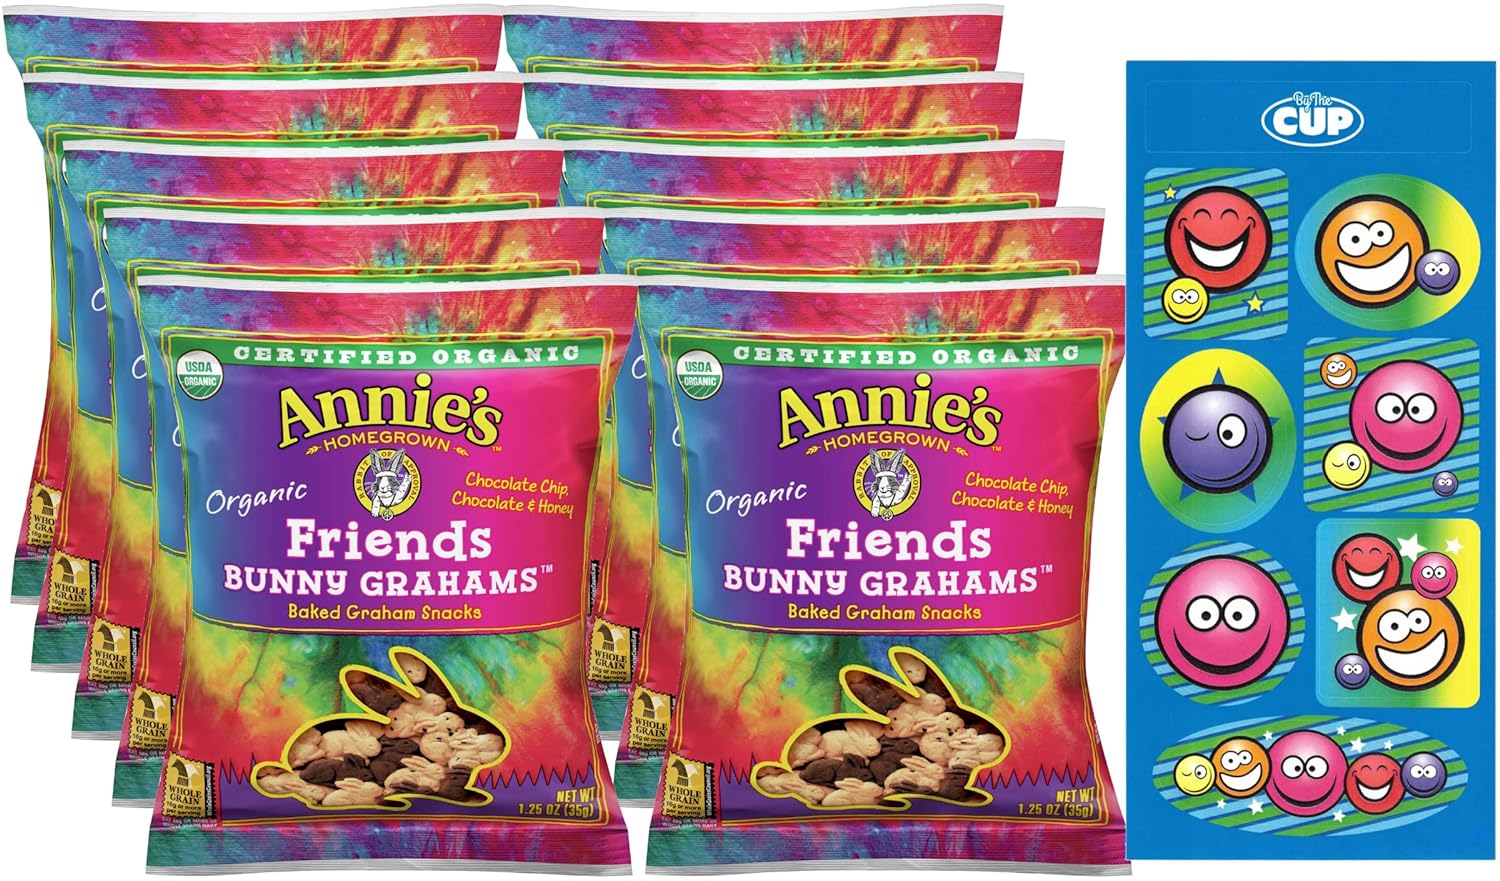 Annie's Organic Friends Bunny Grahams, 1.25 oz (Pack of 10) with By The Cup Stickers